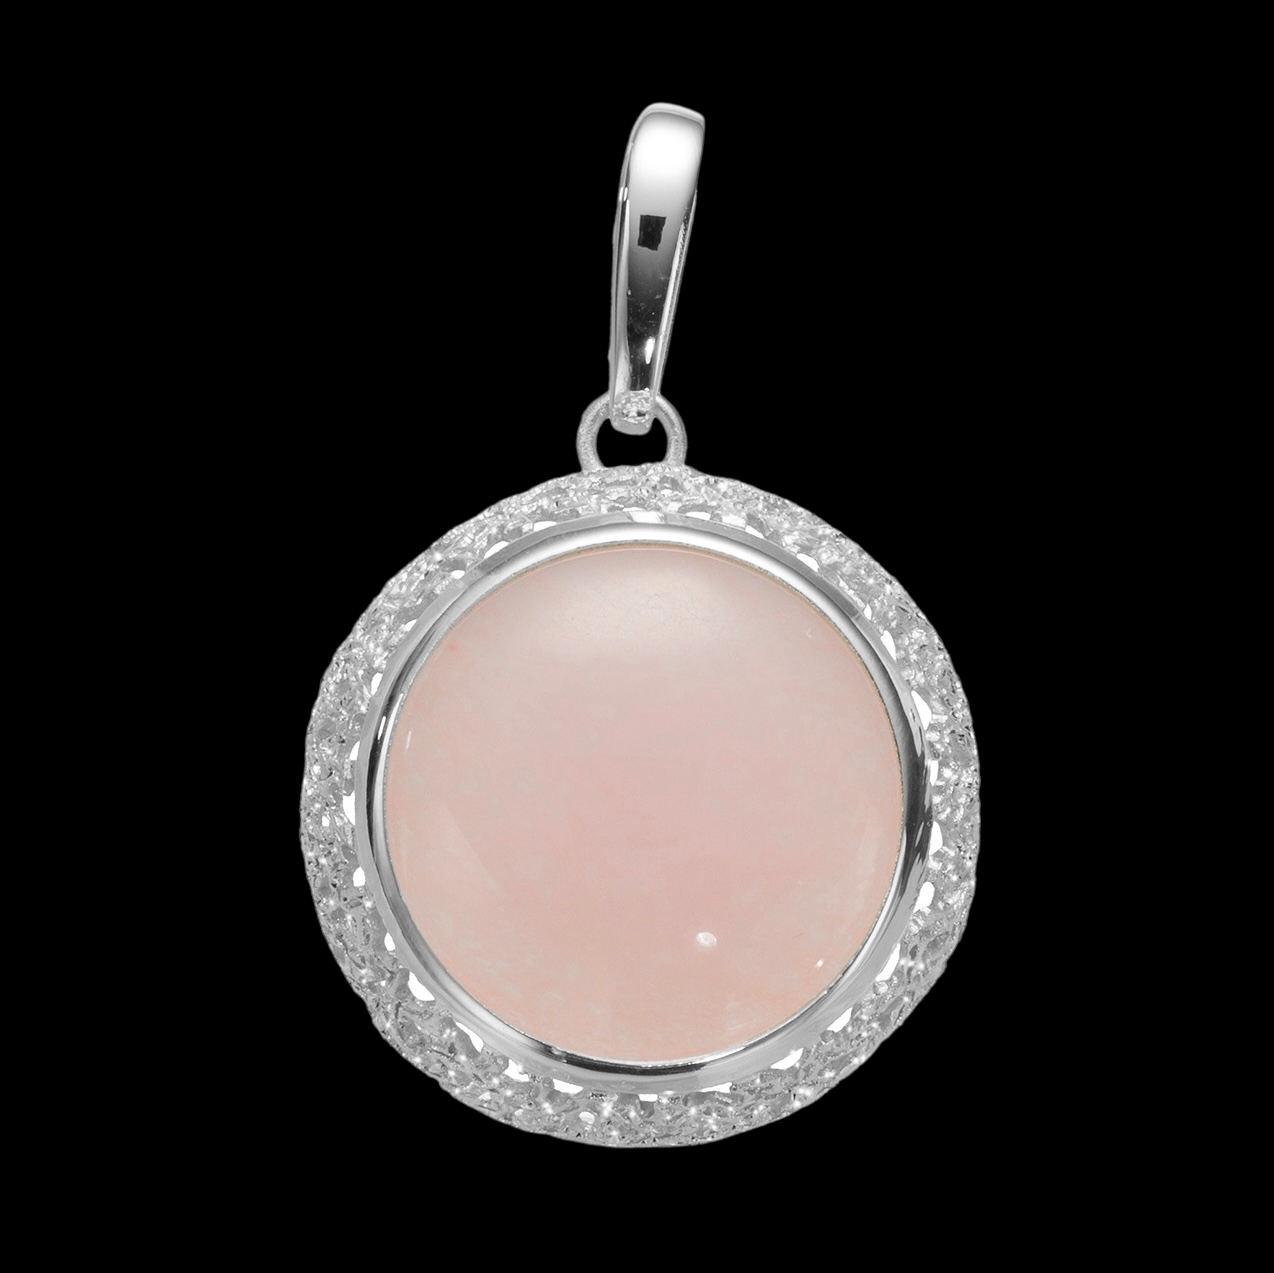 Crafted silver pendant with a pink quartz stone